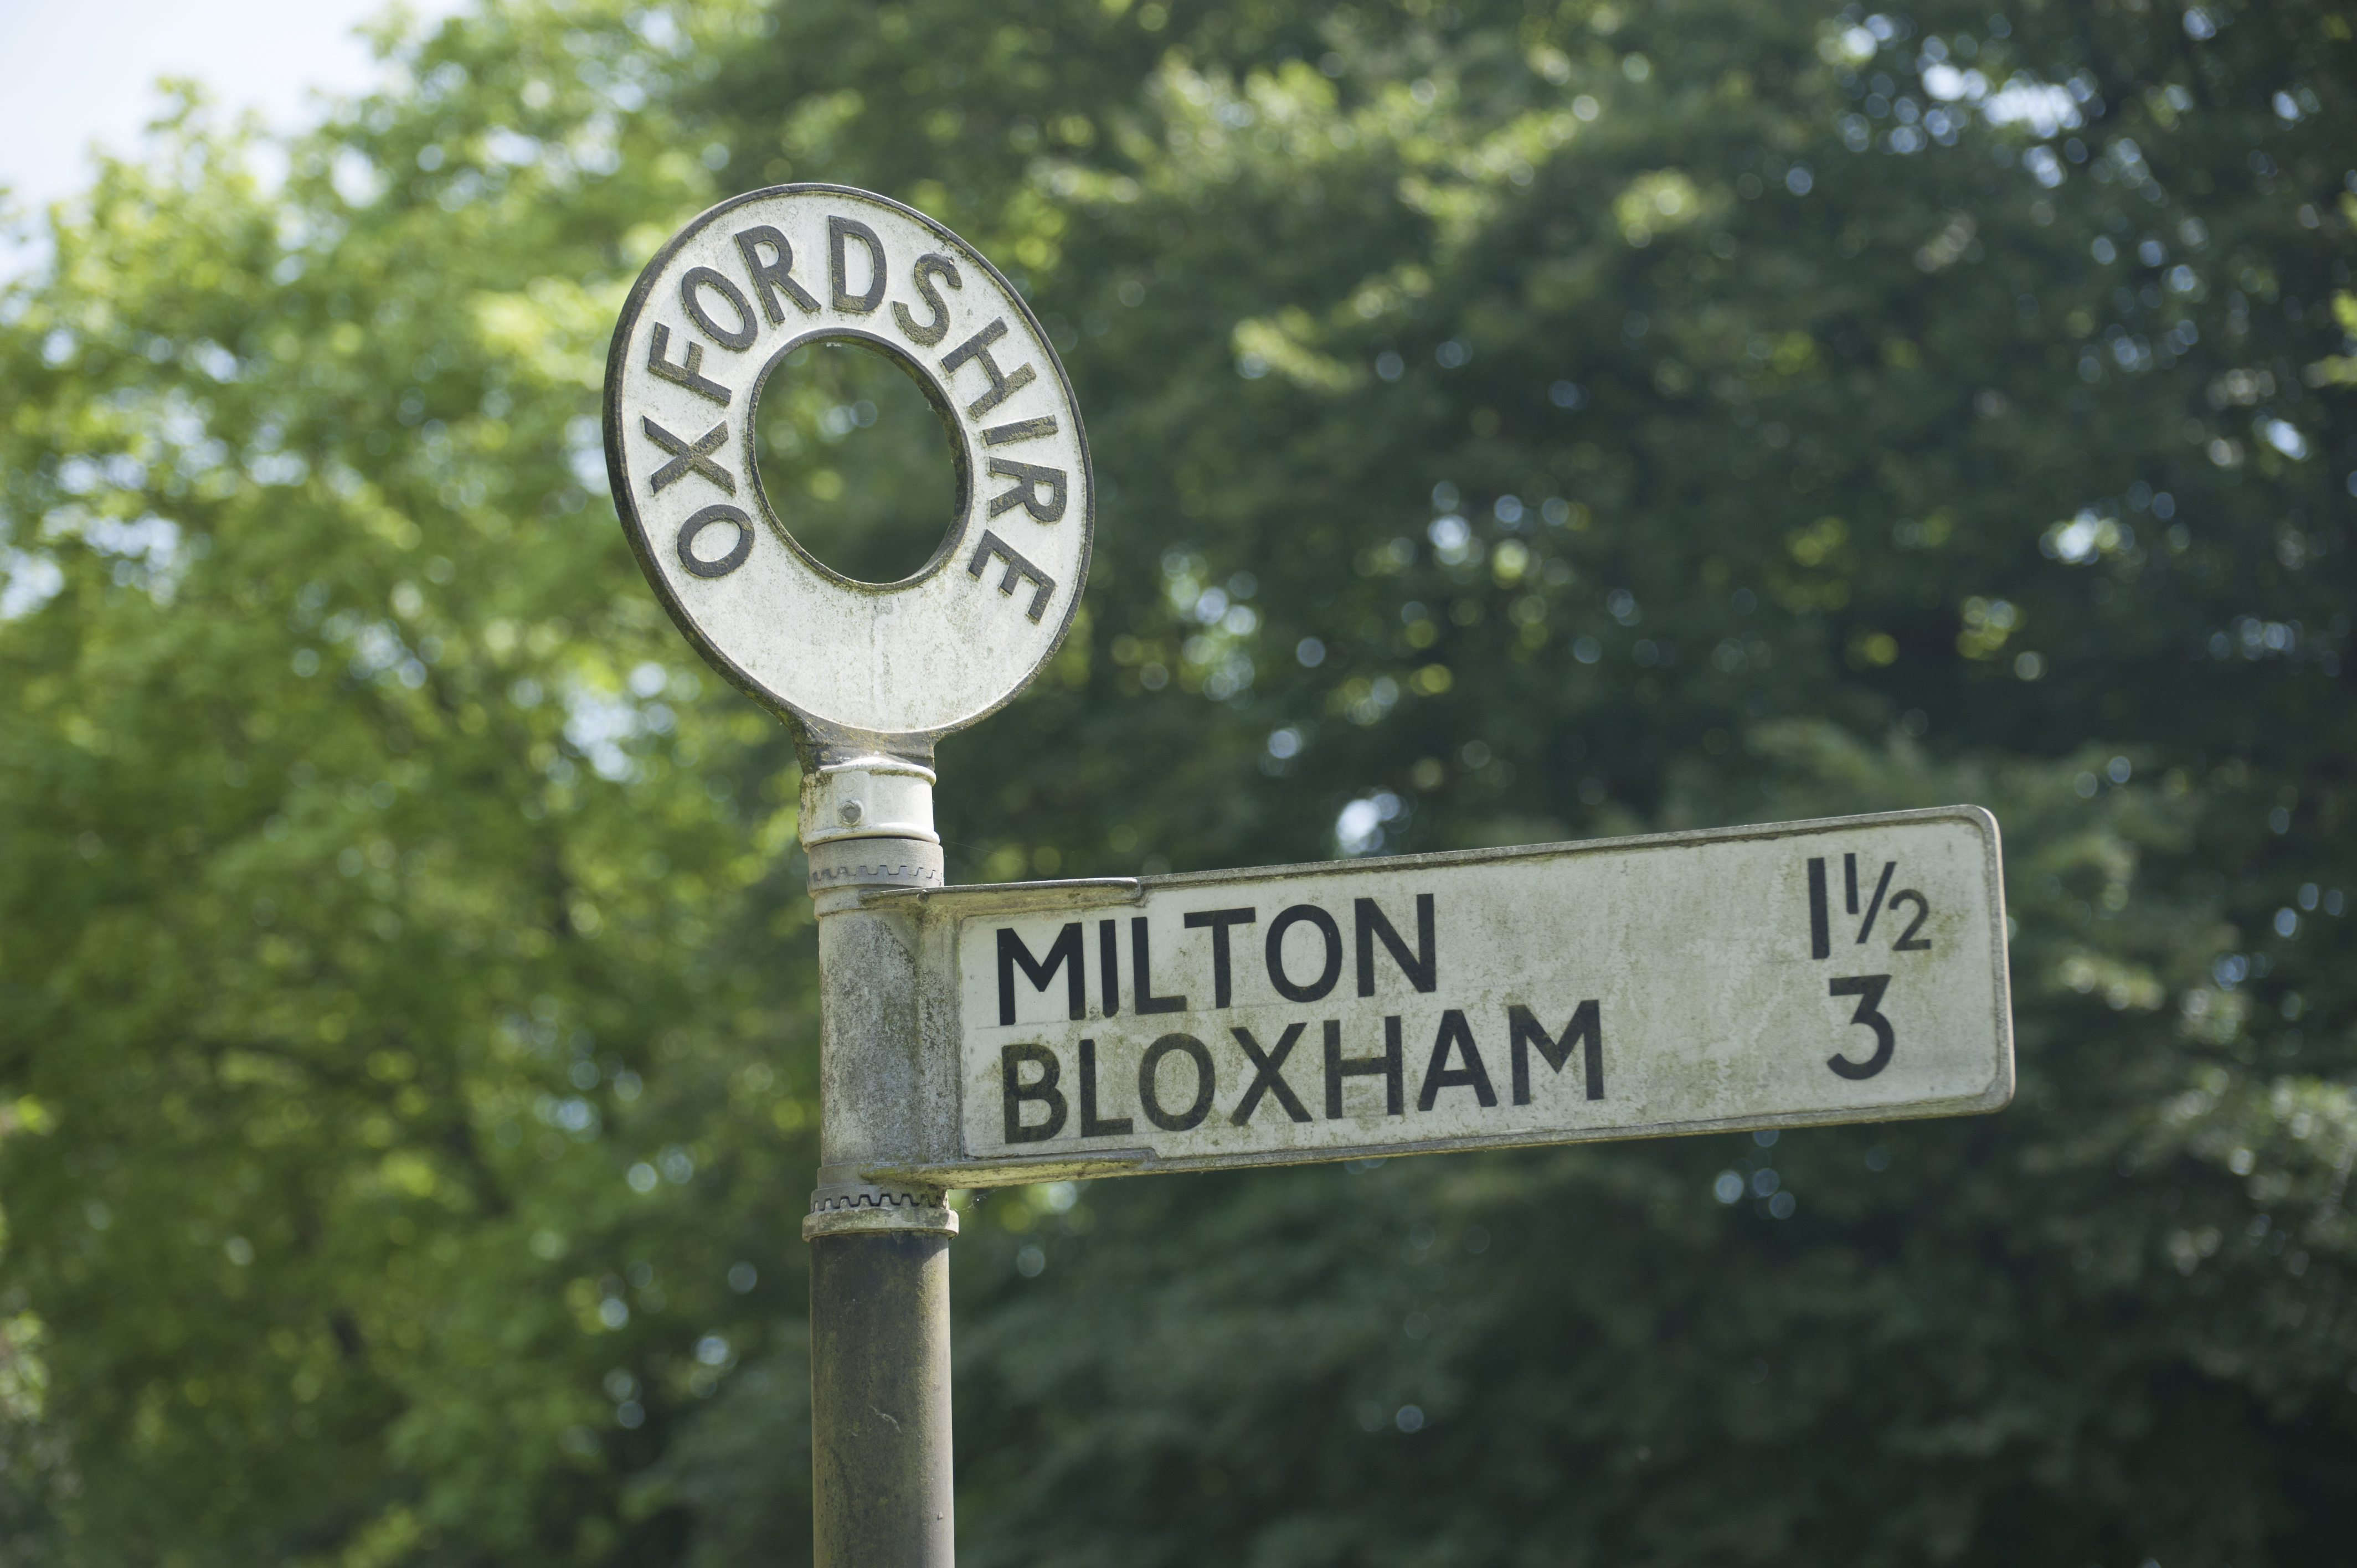 Signpost for Bloxham and Milton